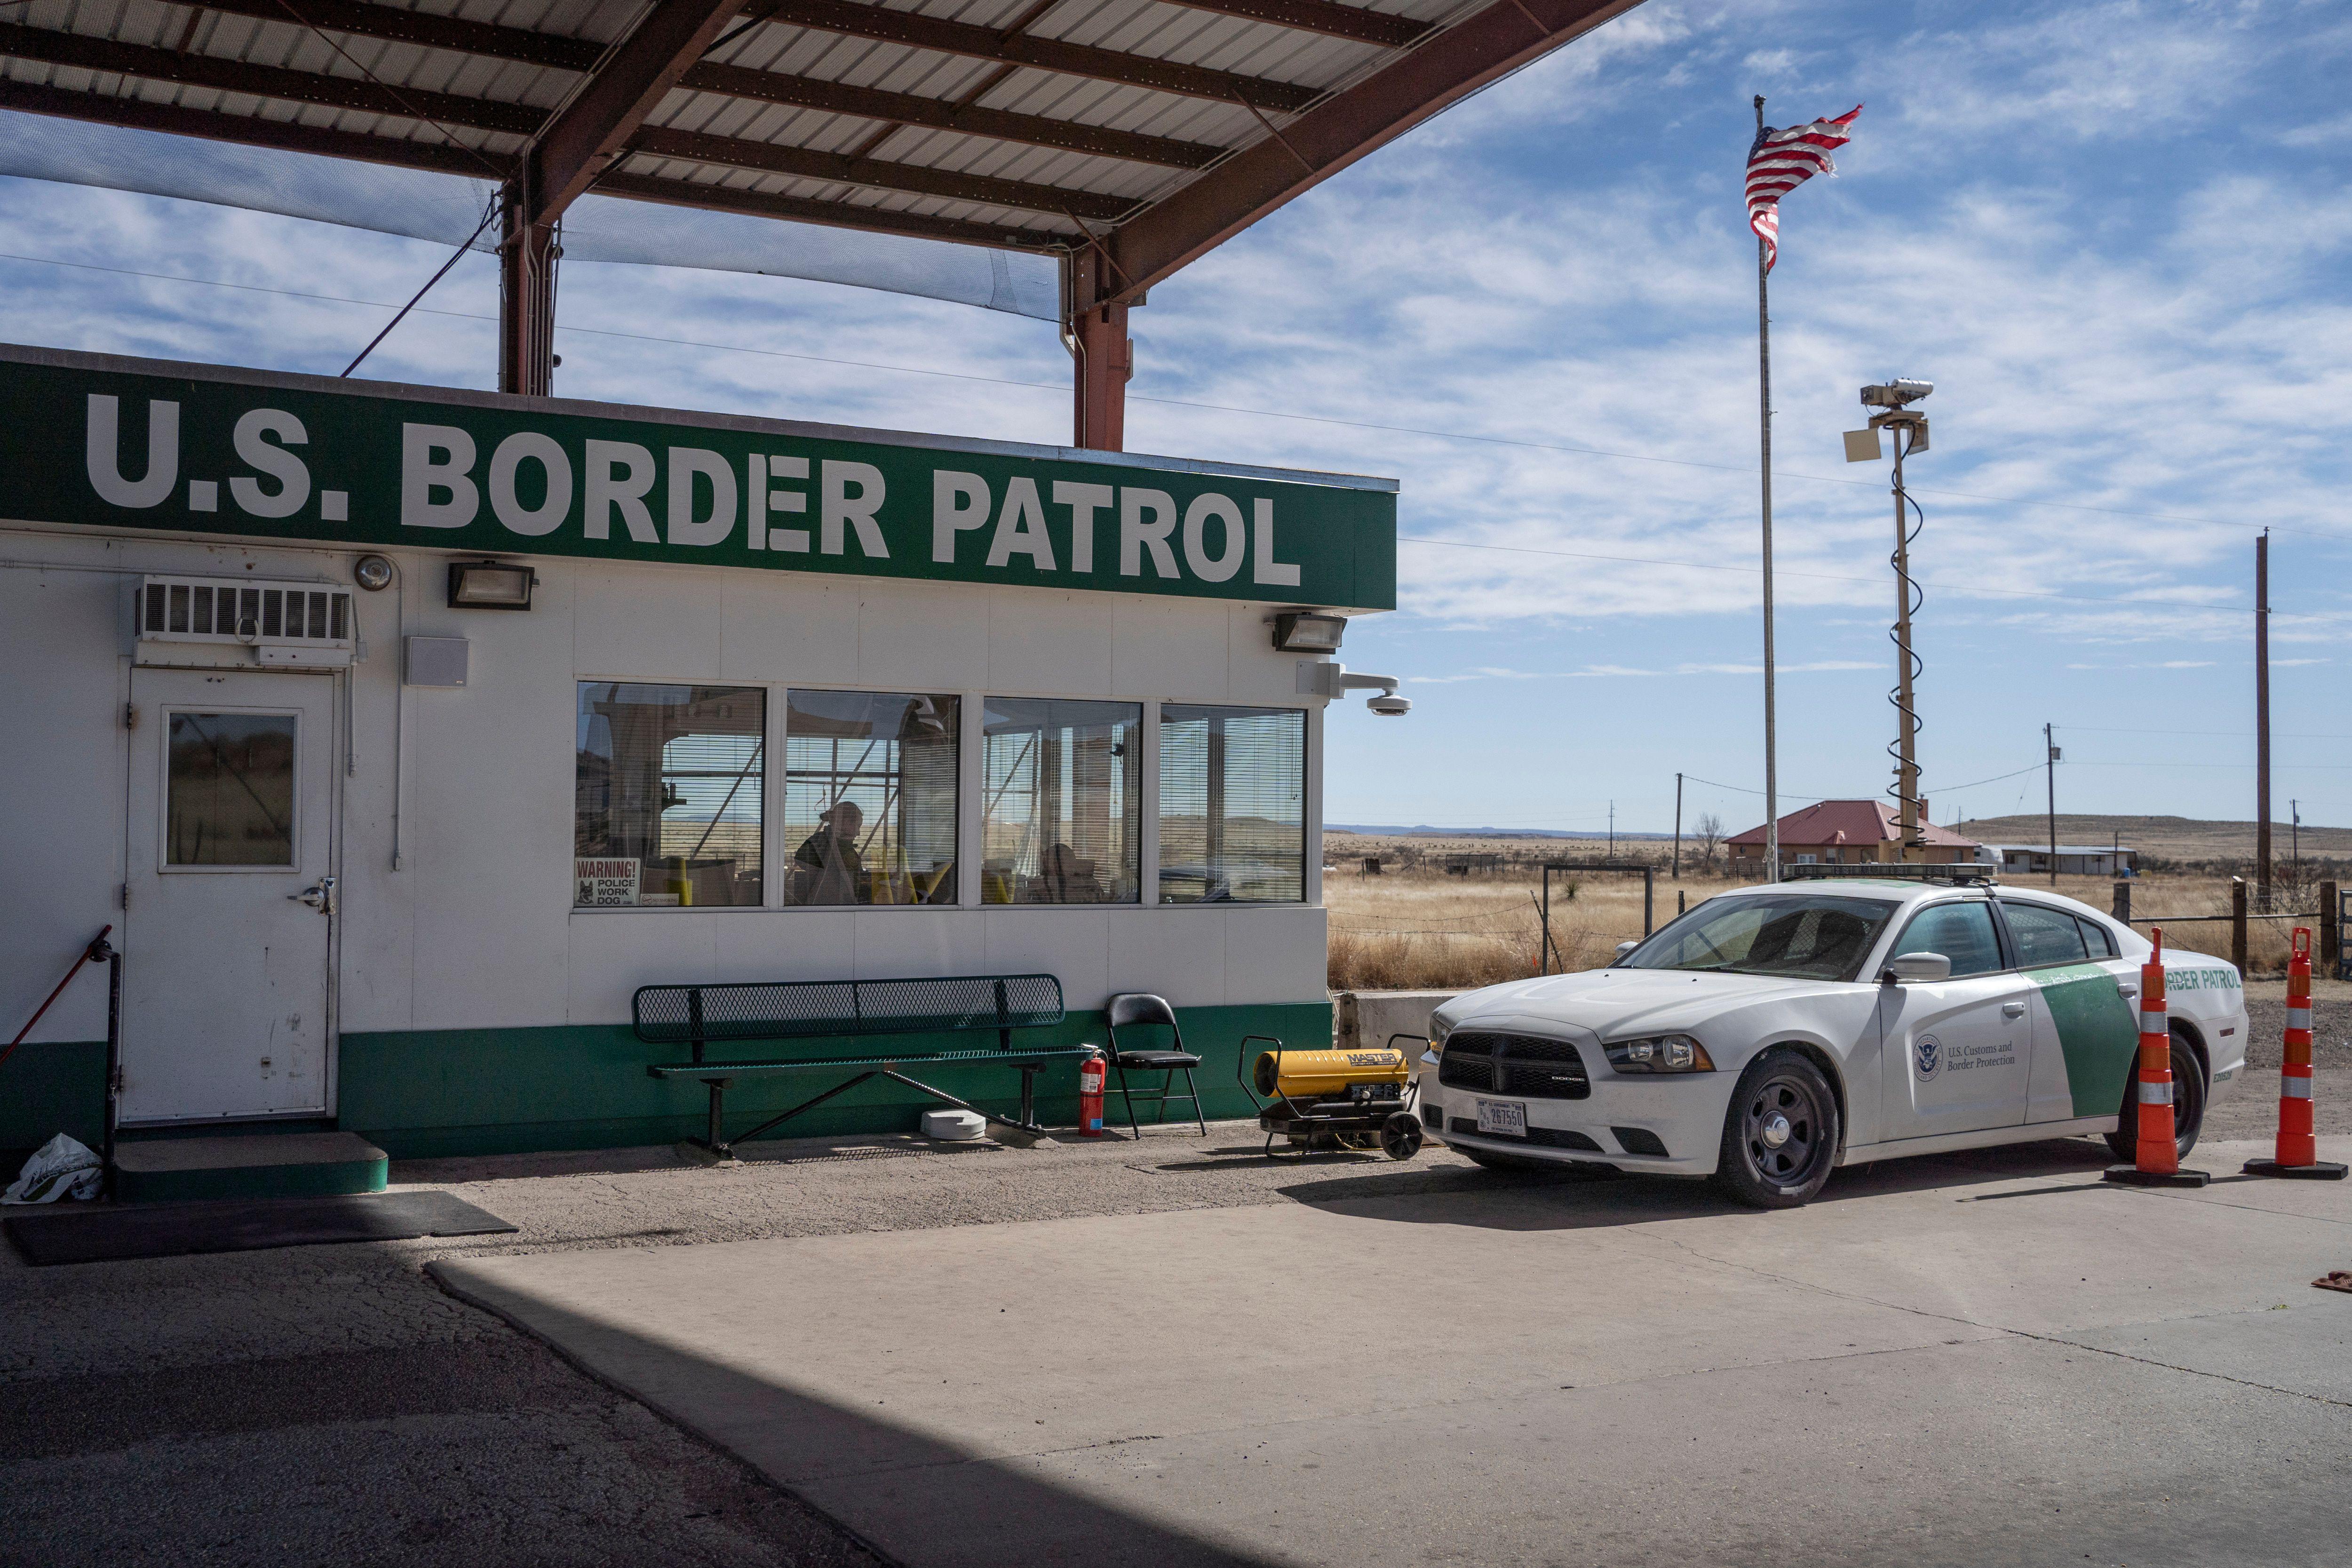 A United States Border Patrol checkpoint in a Texas desert.